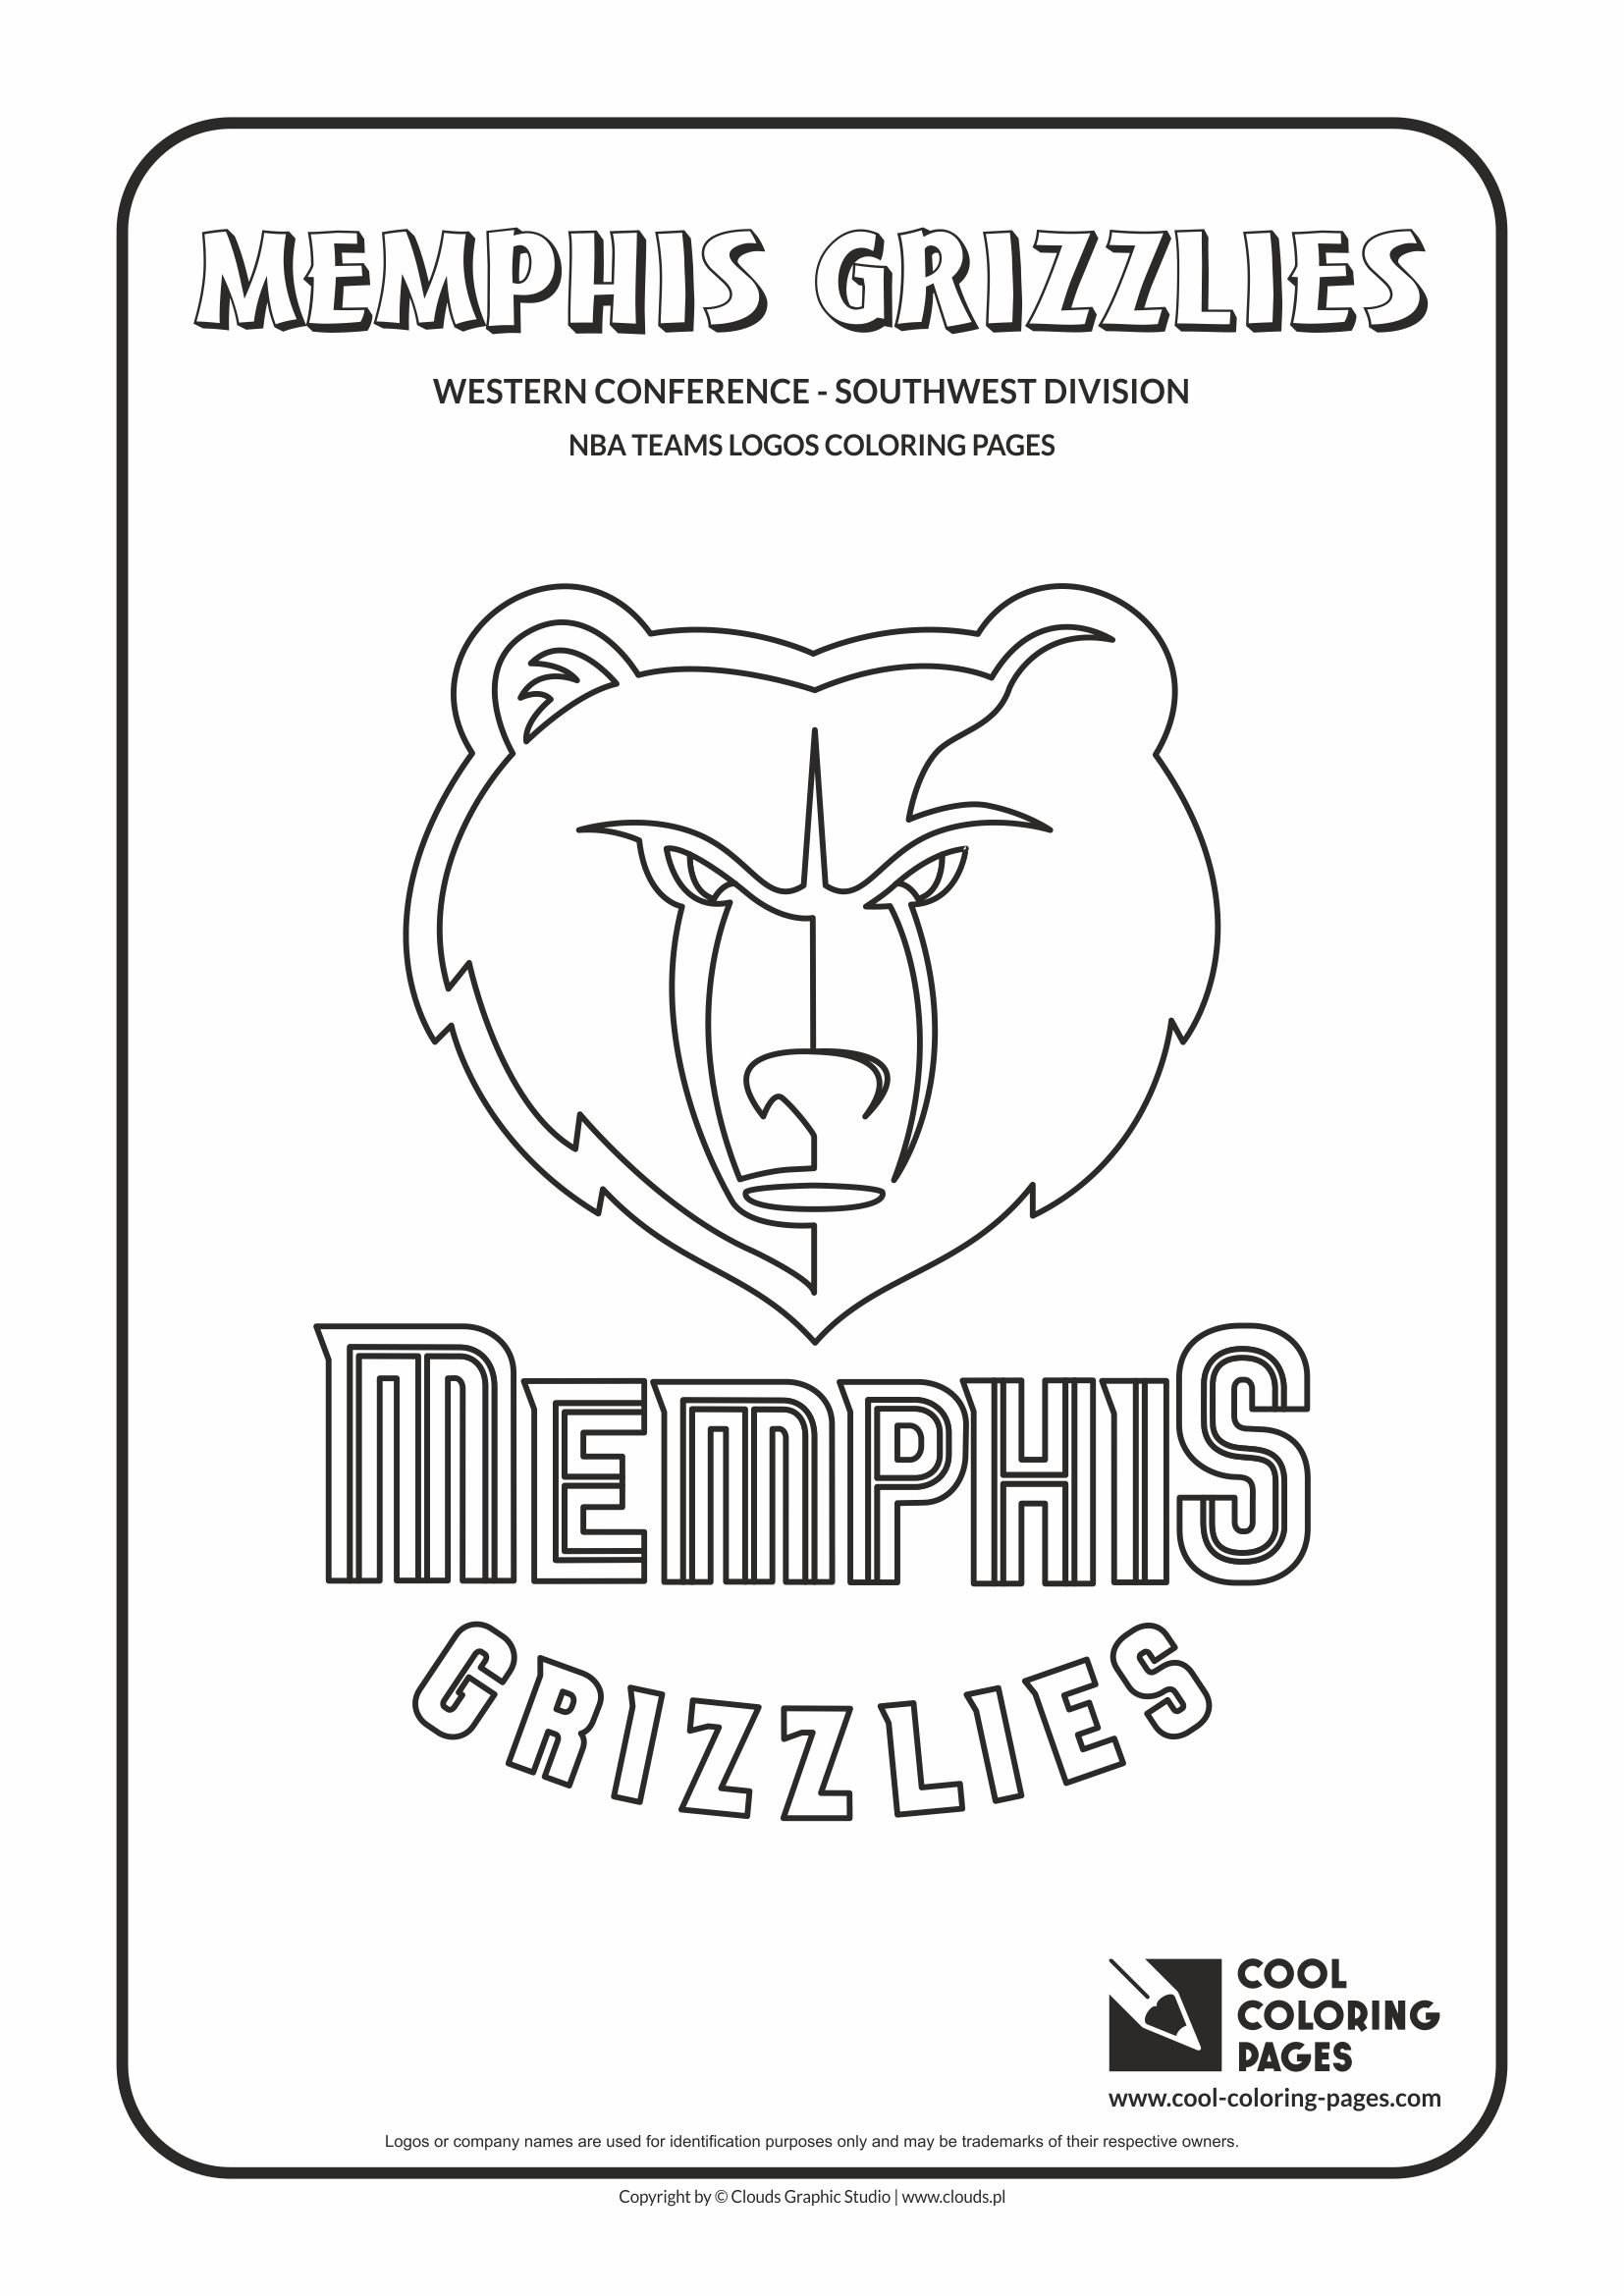 Cool Coloring Pages - NBA Basketball Clubs Logos - Western Conference - Southwest Division / Memphies Grizzlies logo / Coloring page with Memphies Grizzlies logo